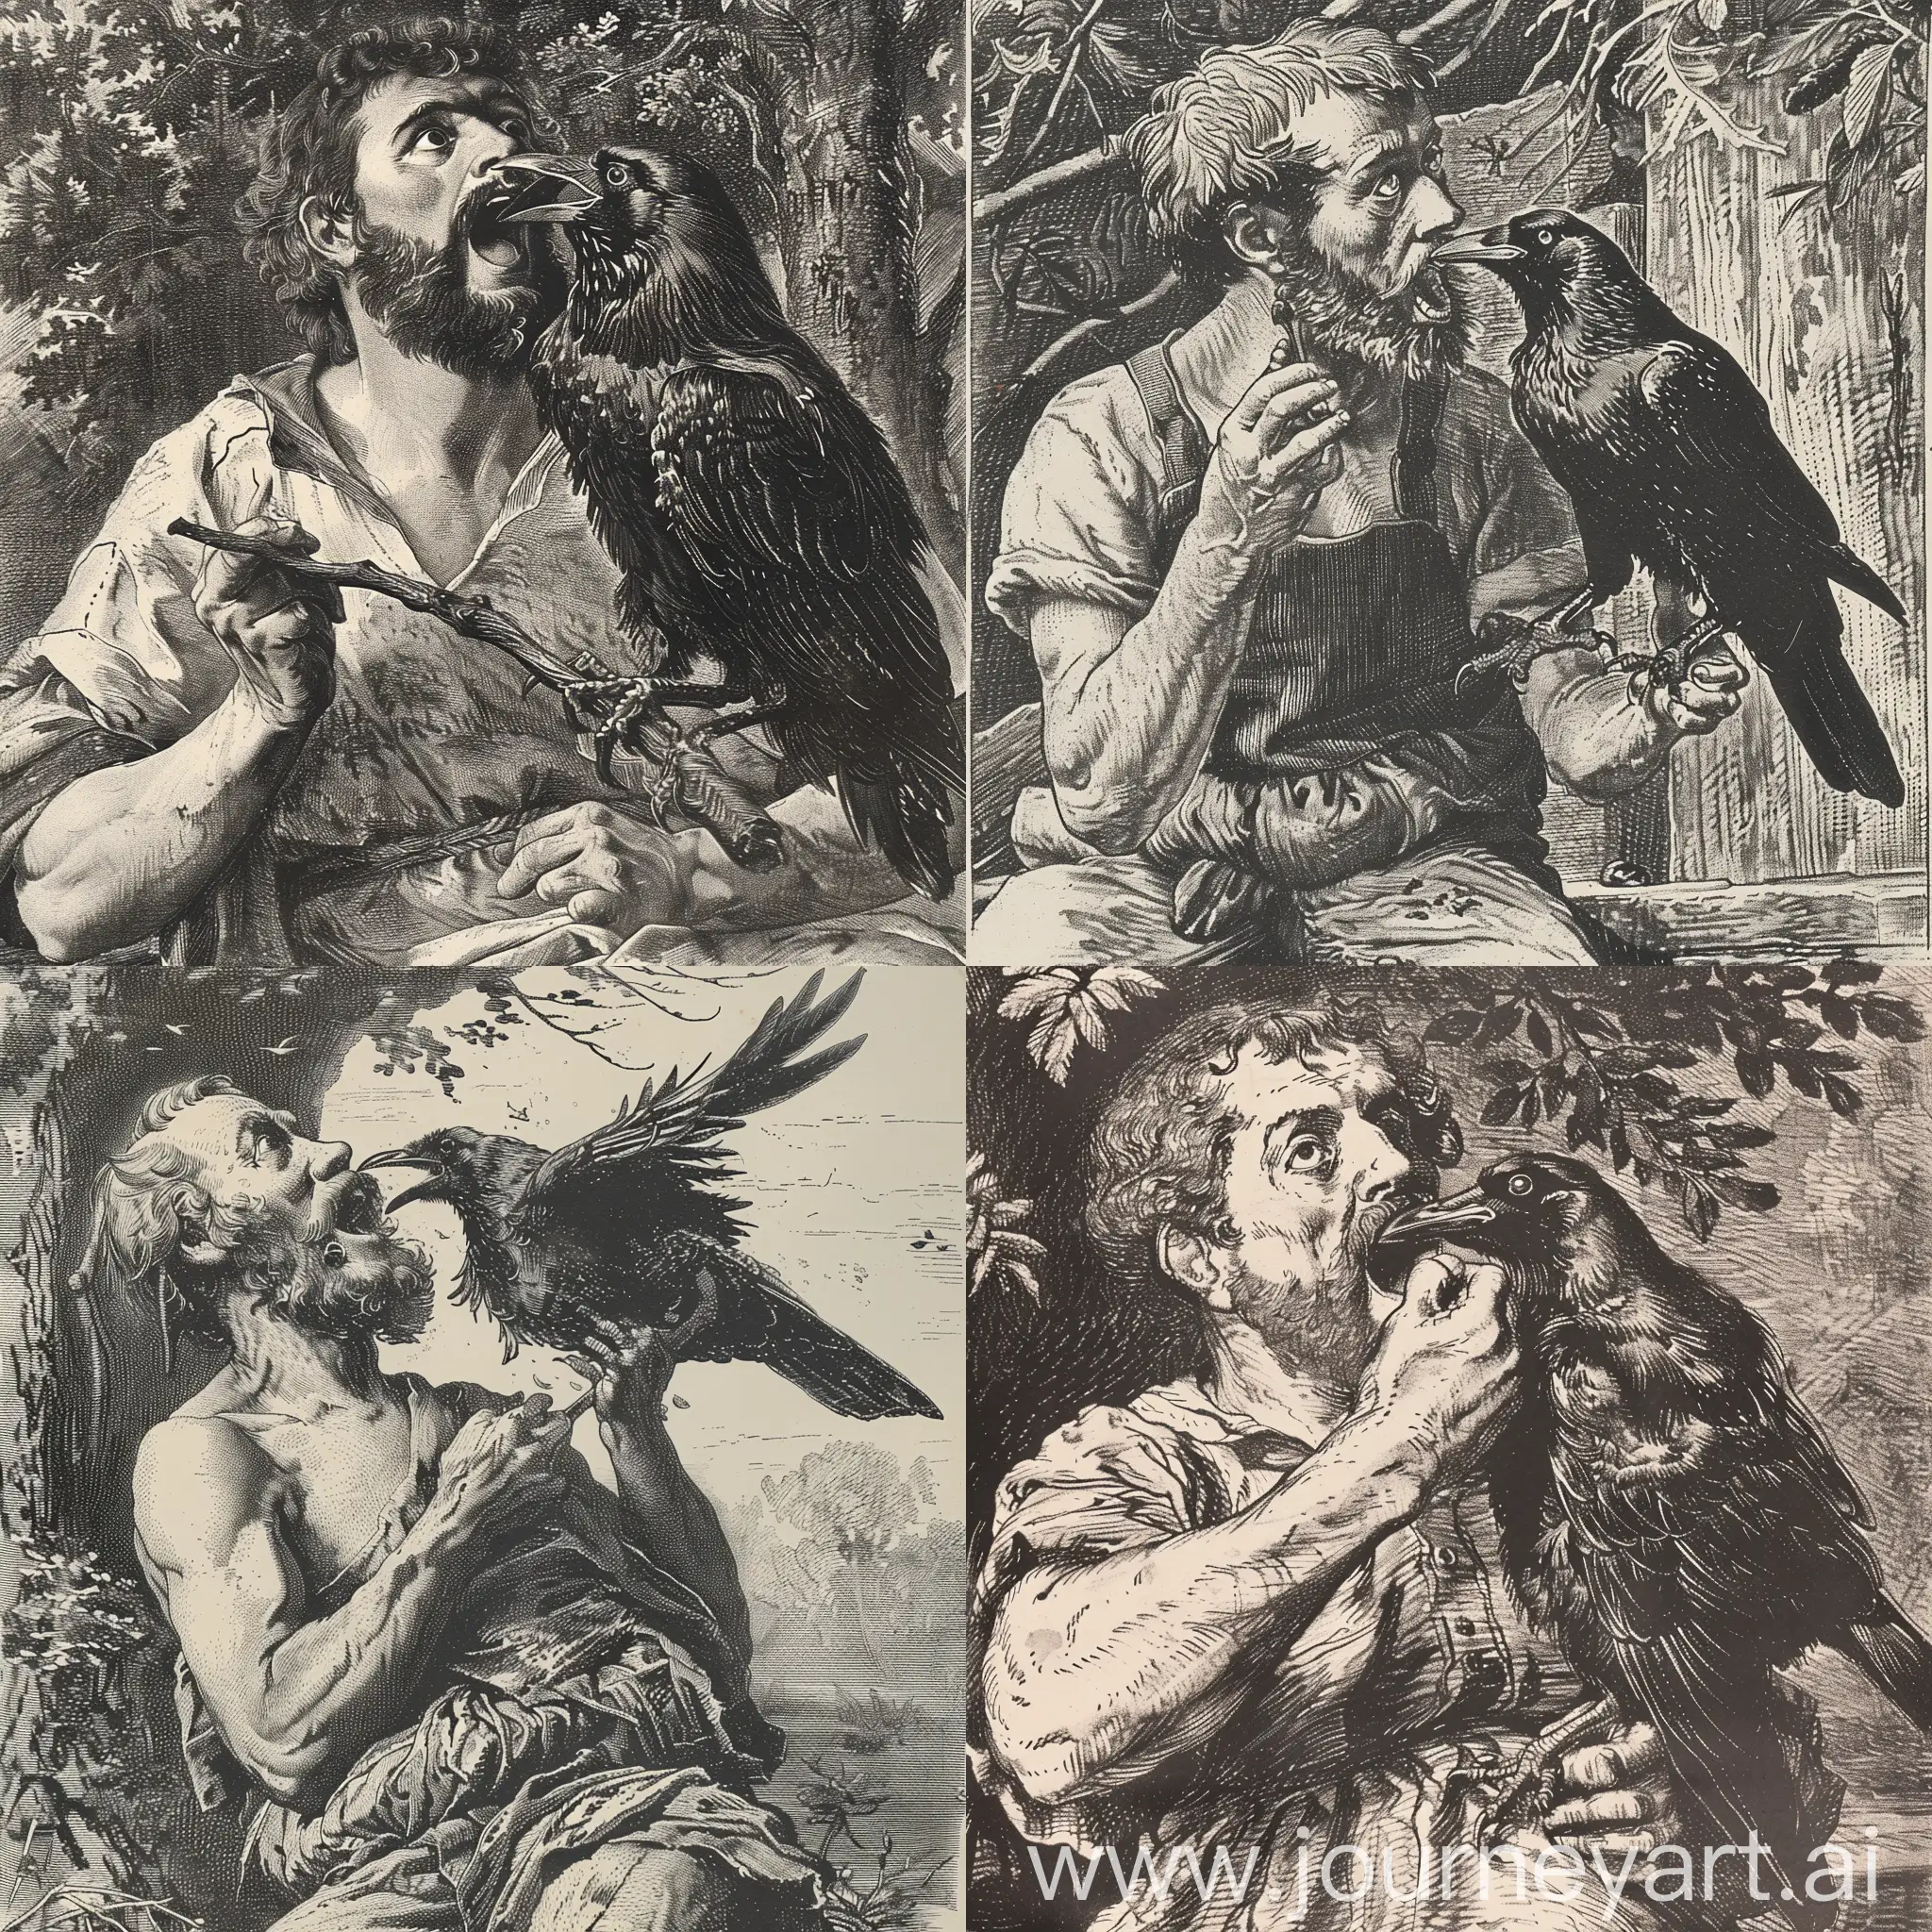 Allegory-of-Being-Proven-Wrong-Man-Eating-a-Crow-in-19th-Century-Lithograph